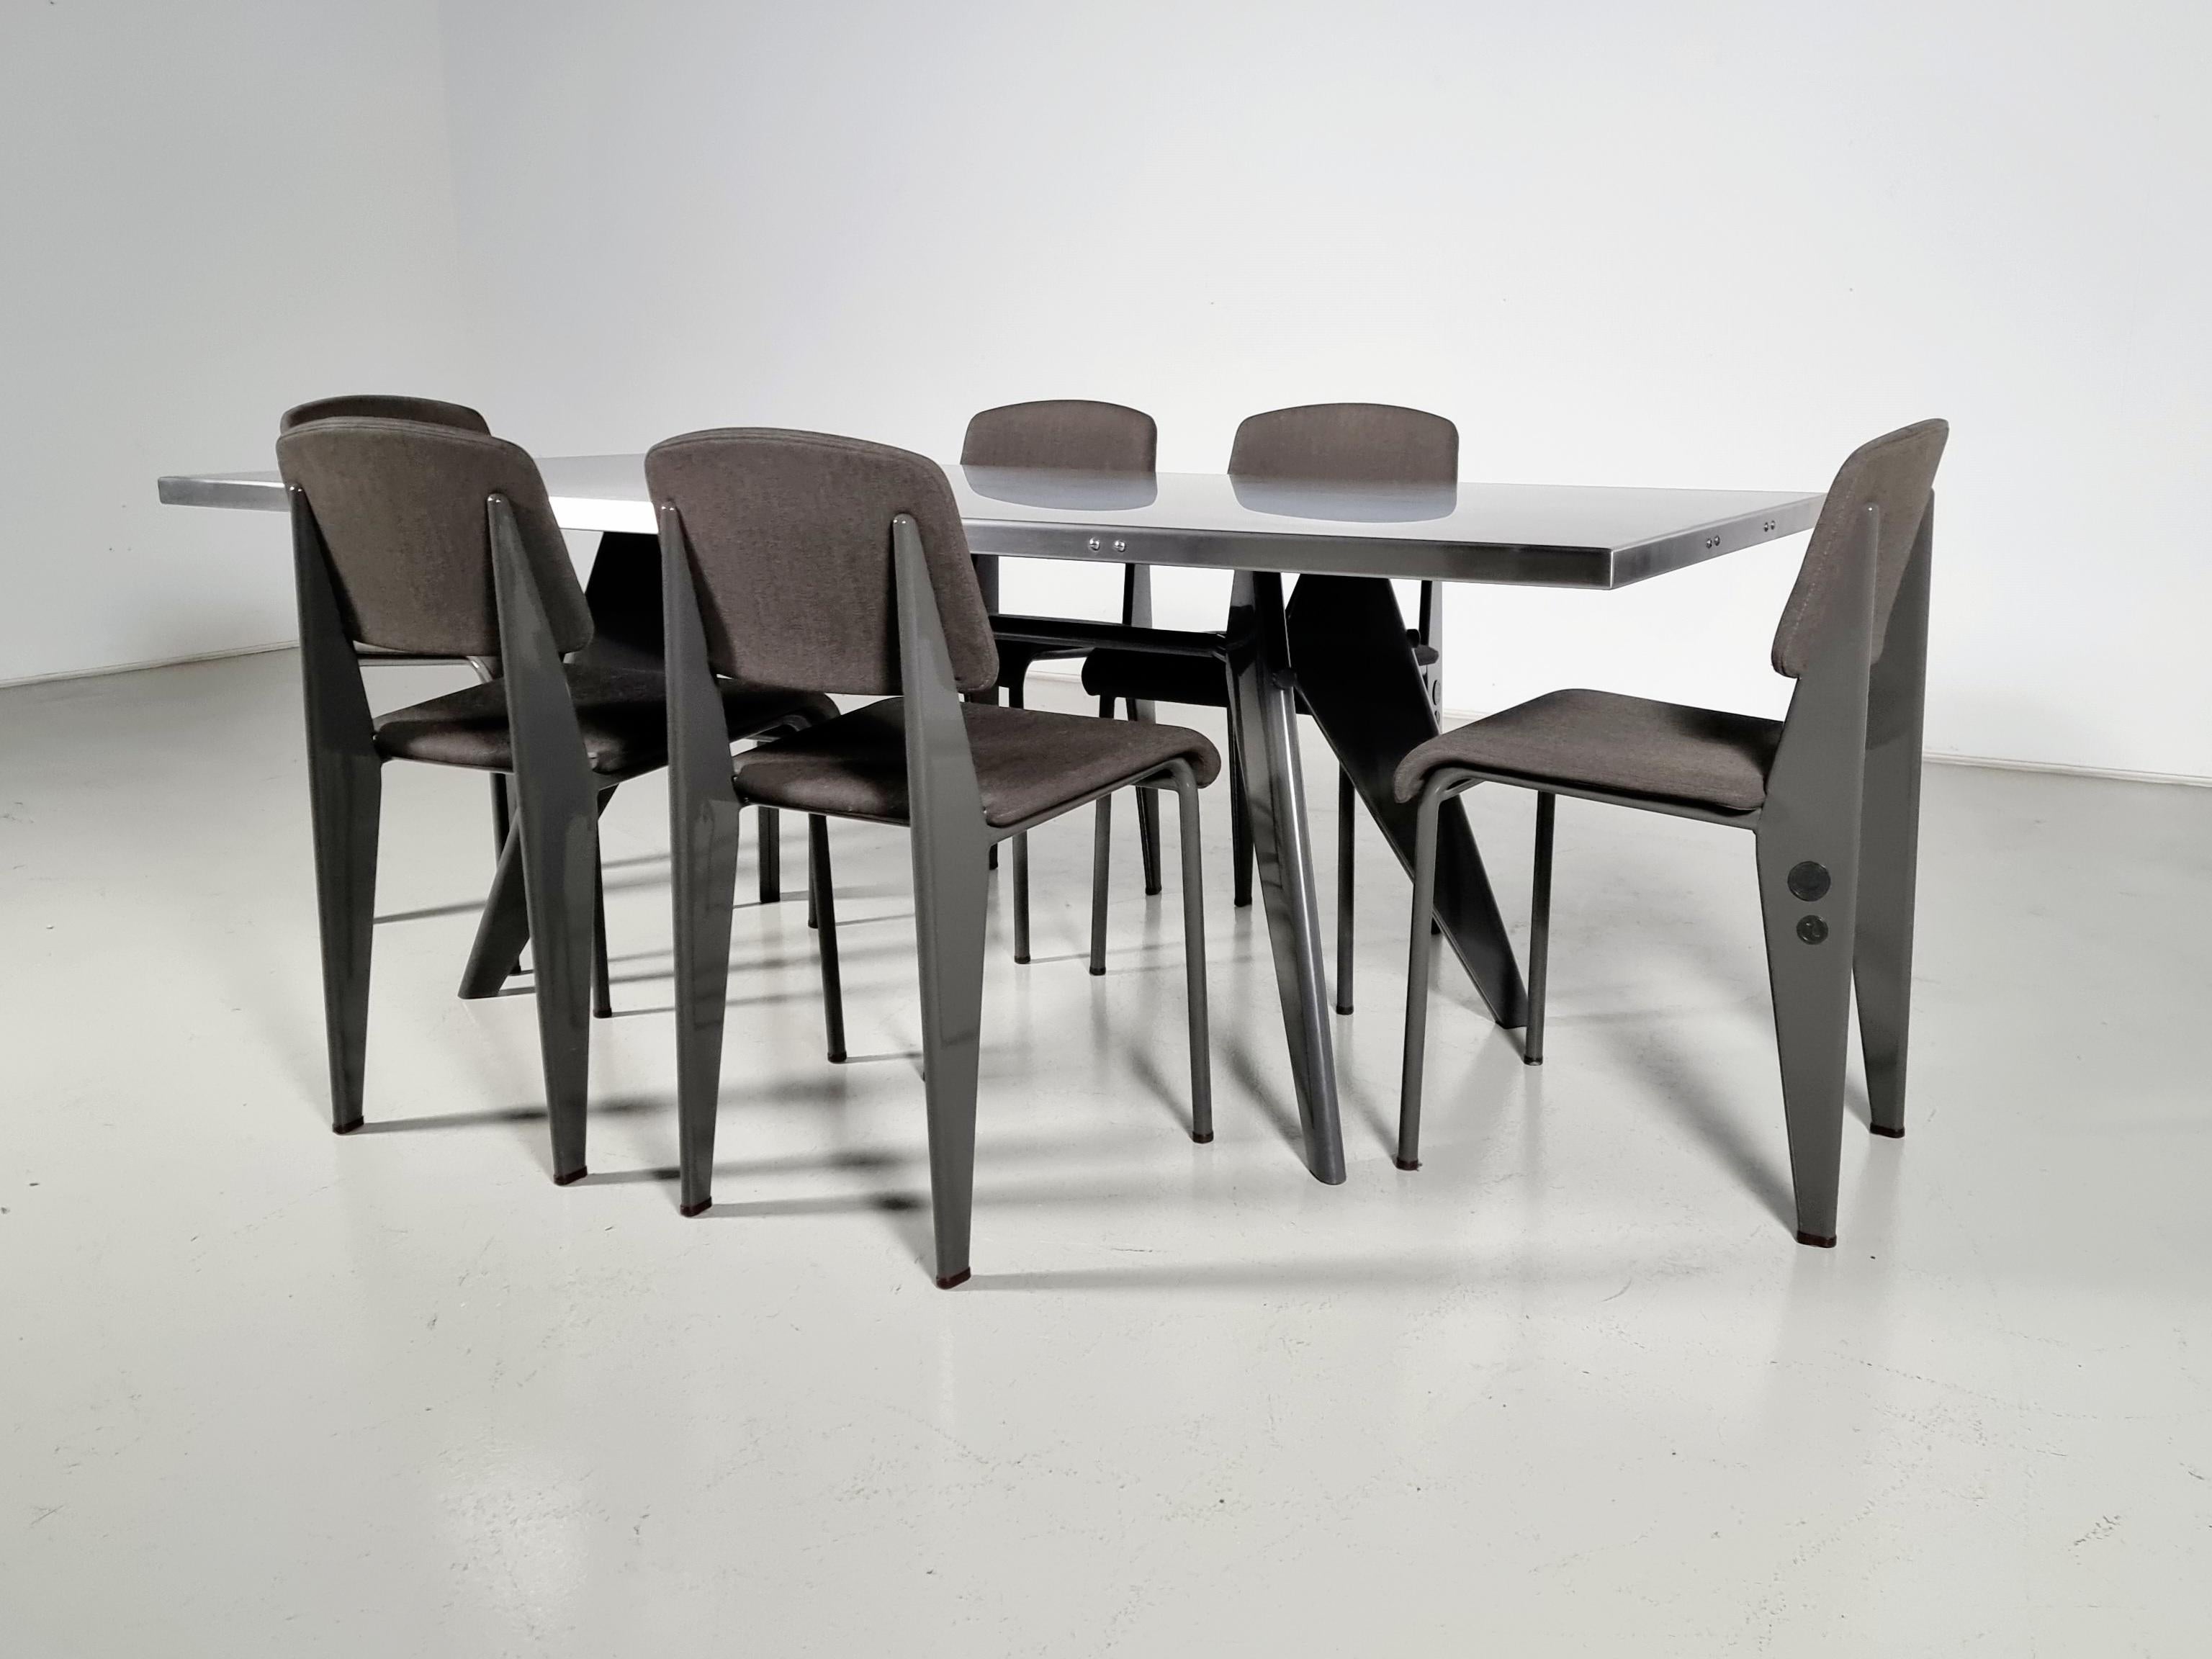 European Jean Prouve by G-Star Raw for Vitra S.A.M. Tropique Table with matching chairs For Sale